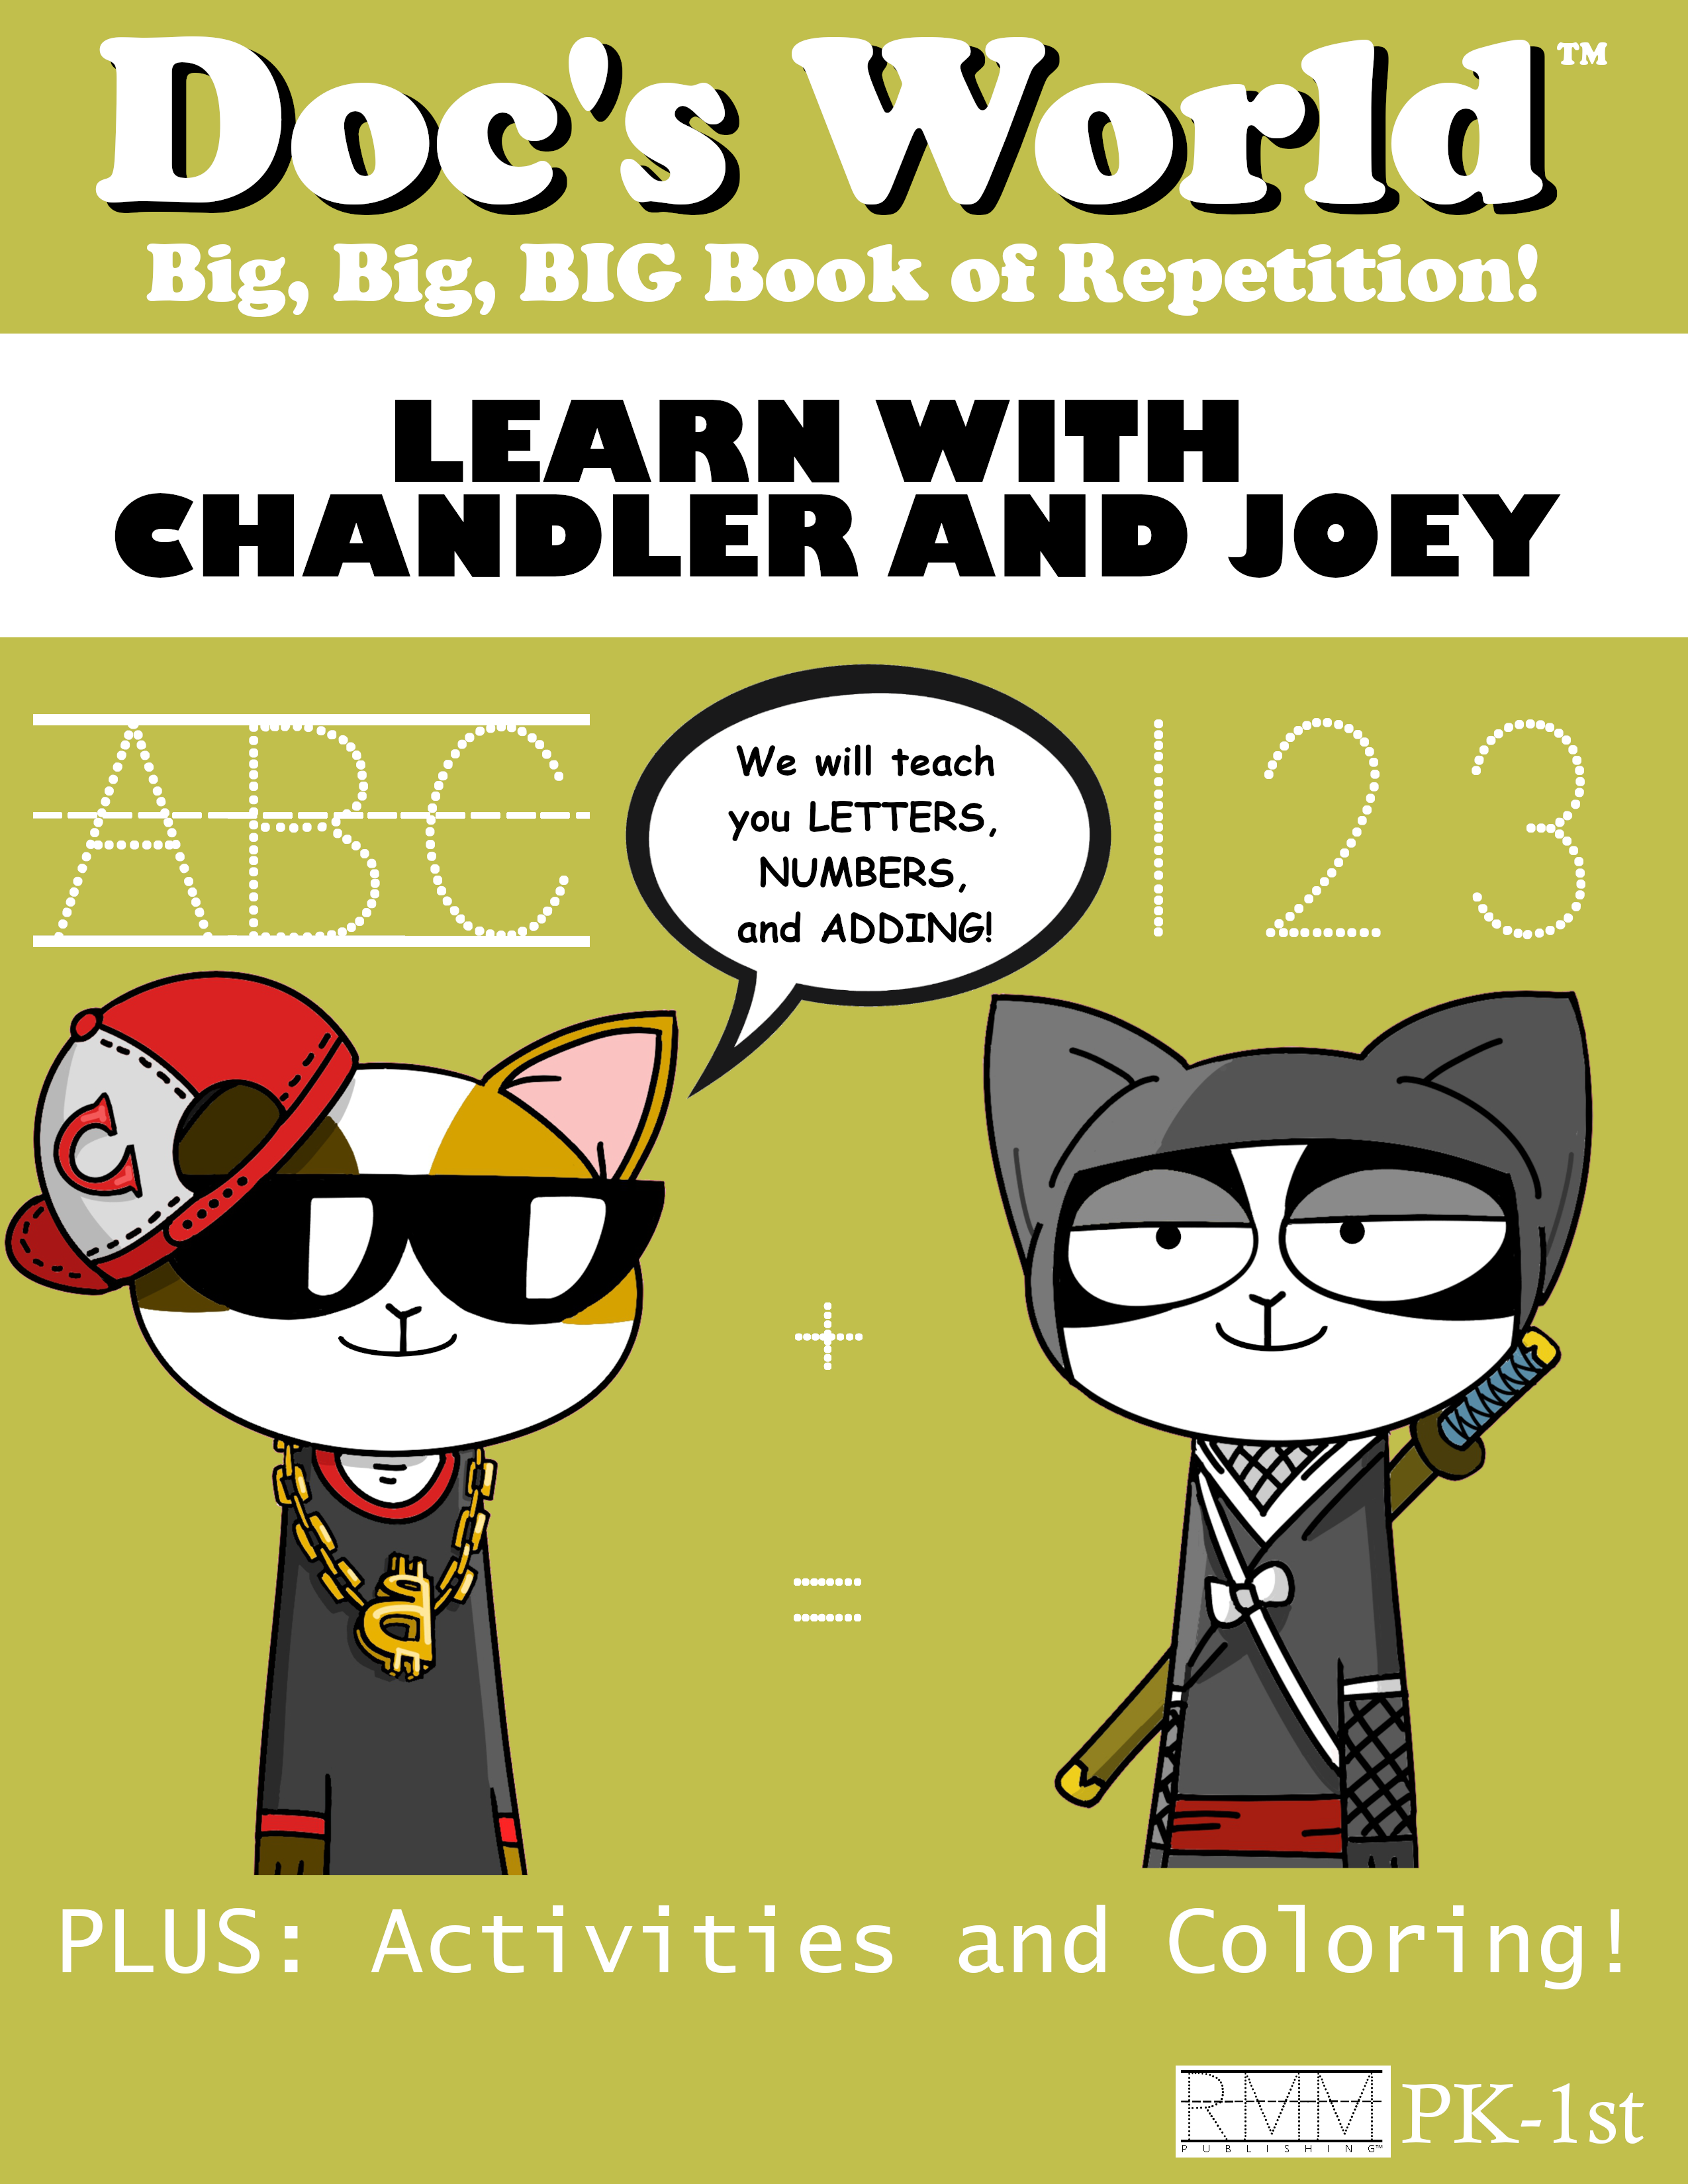 Chandler and Joey Cover 1